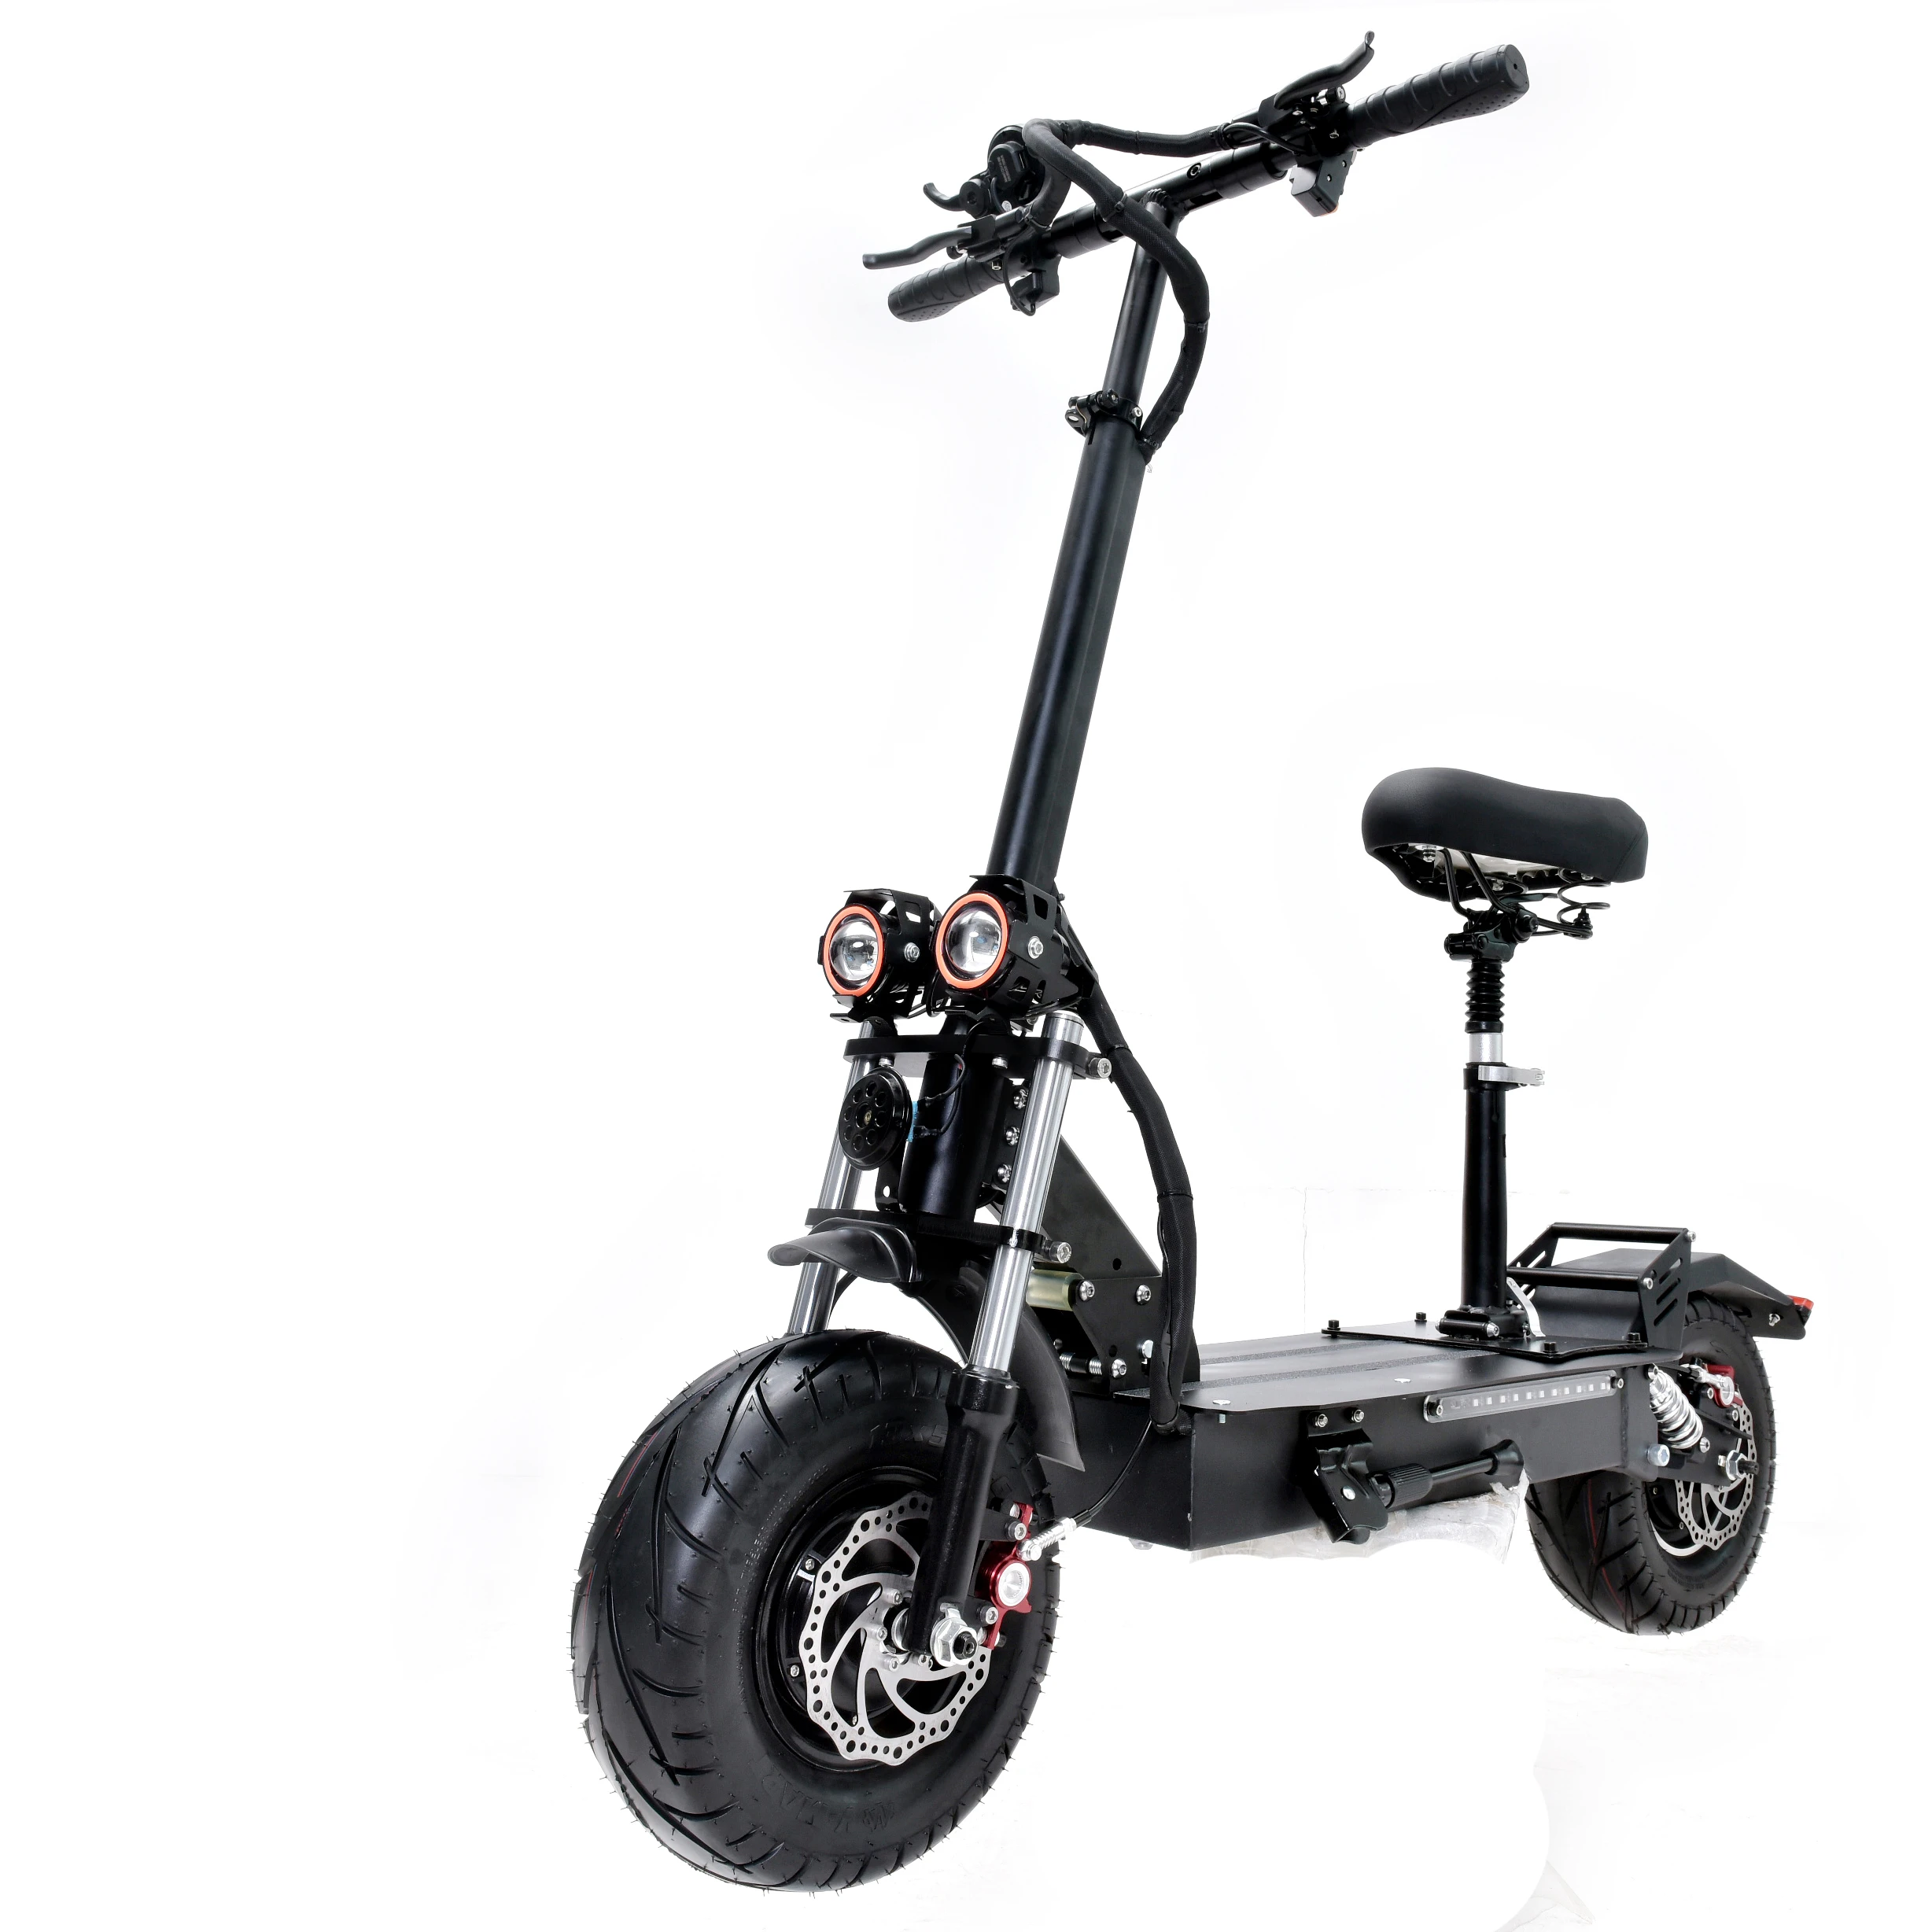 

Fat Tire Max Speed to 90km/h flj t113 11inch off road fat tire 3200w 60v eu electric scooter